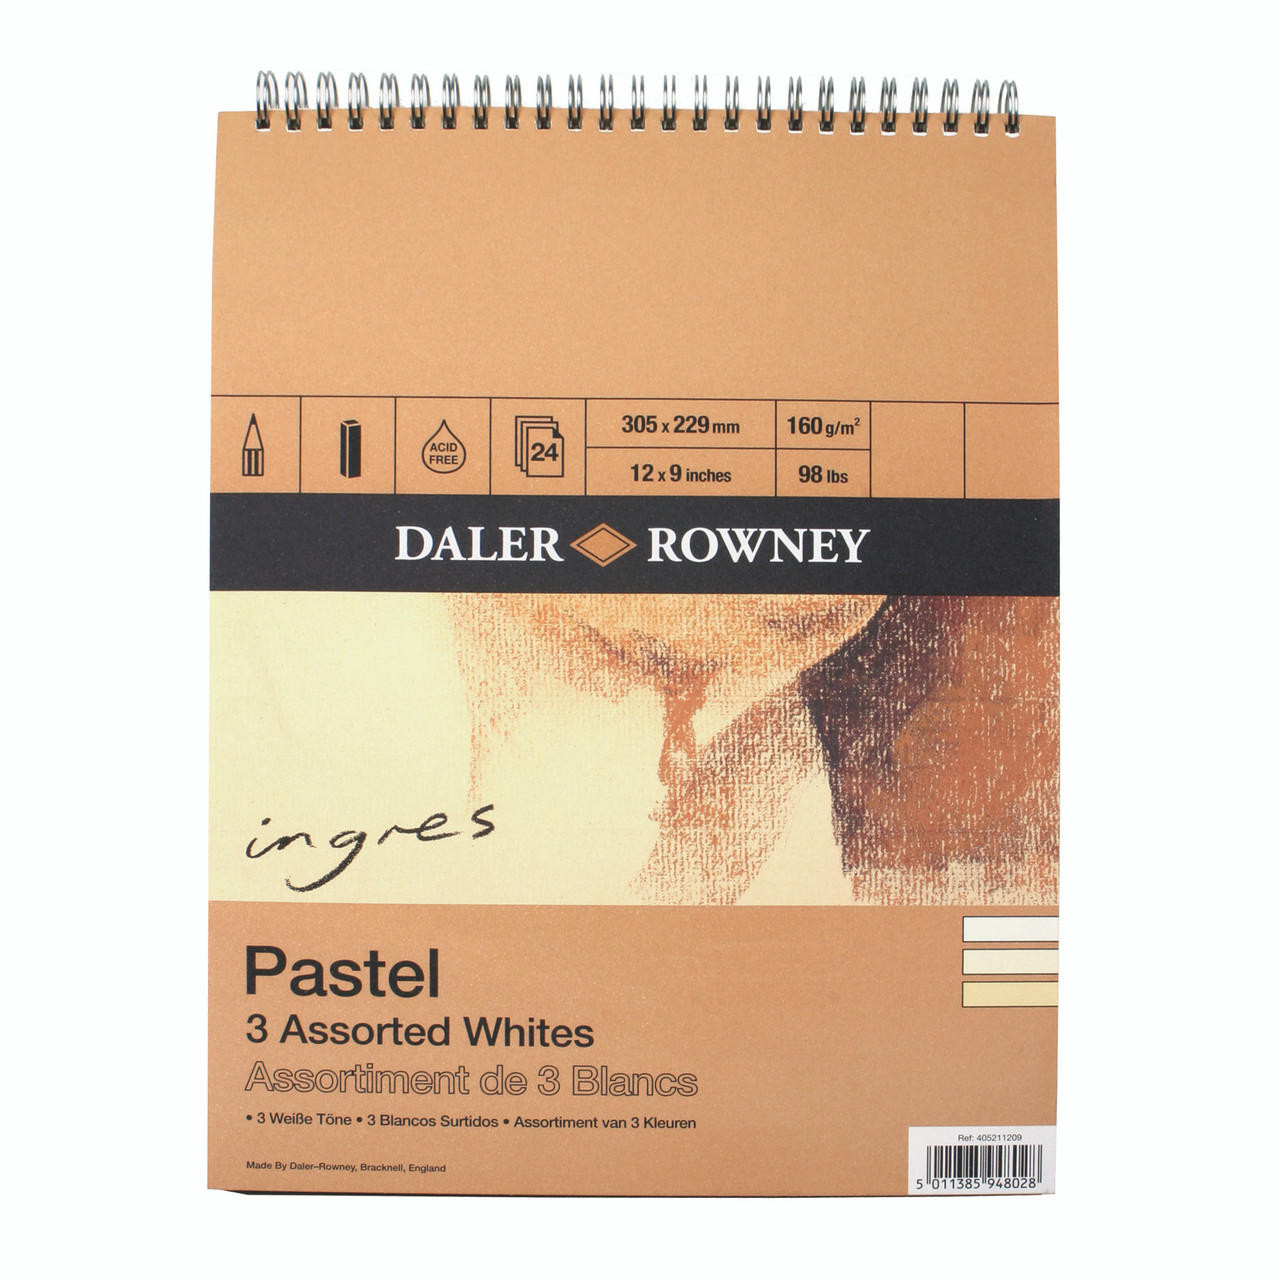 Daler Rowney Ingres Spiral Pastel Pad 150gsm 24 sheets 3 Assorted Whites 12x9 inches